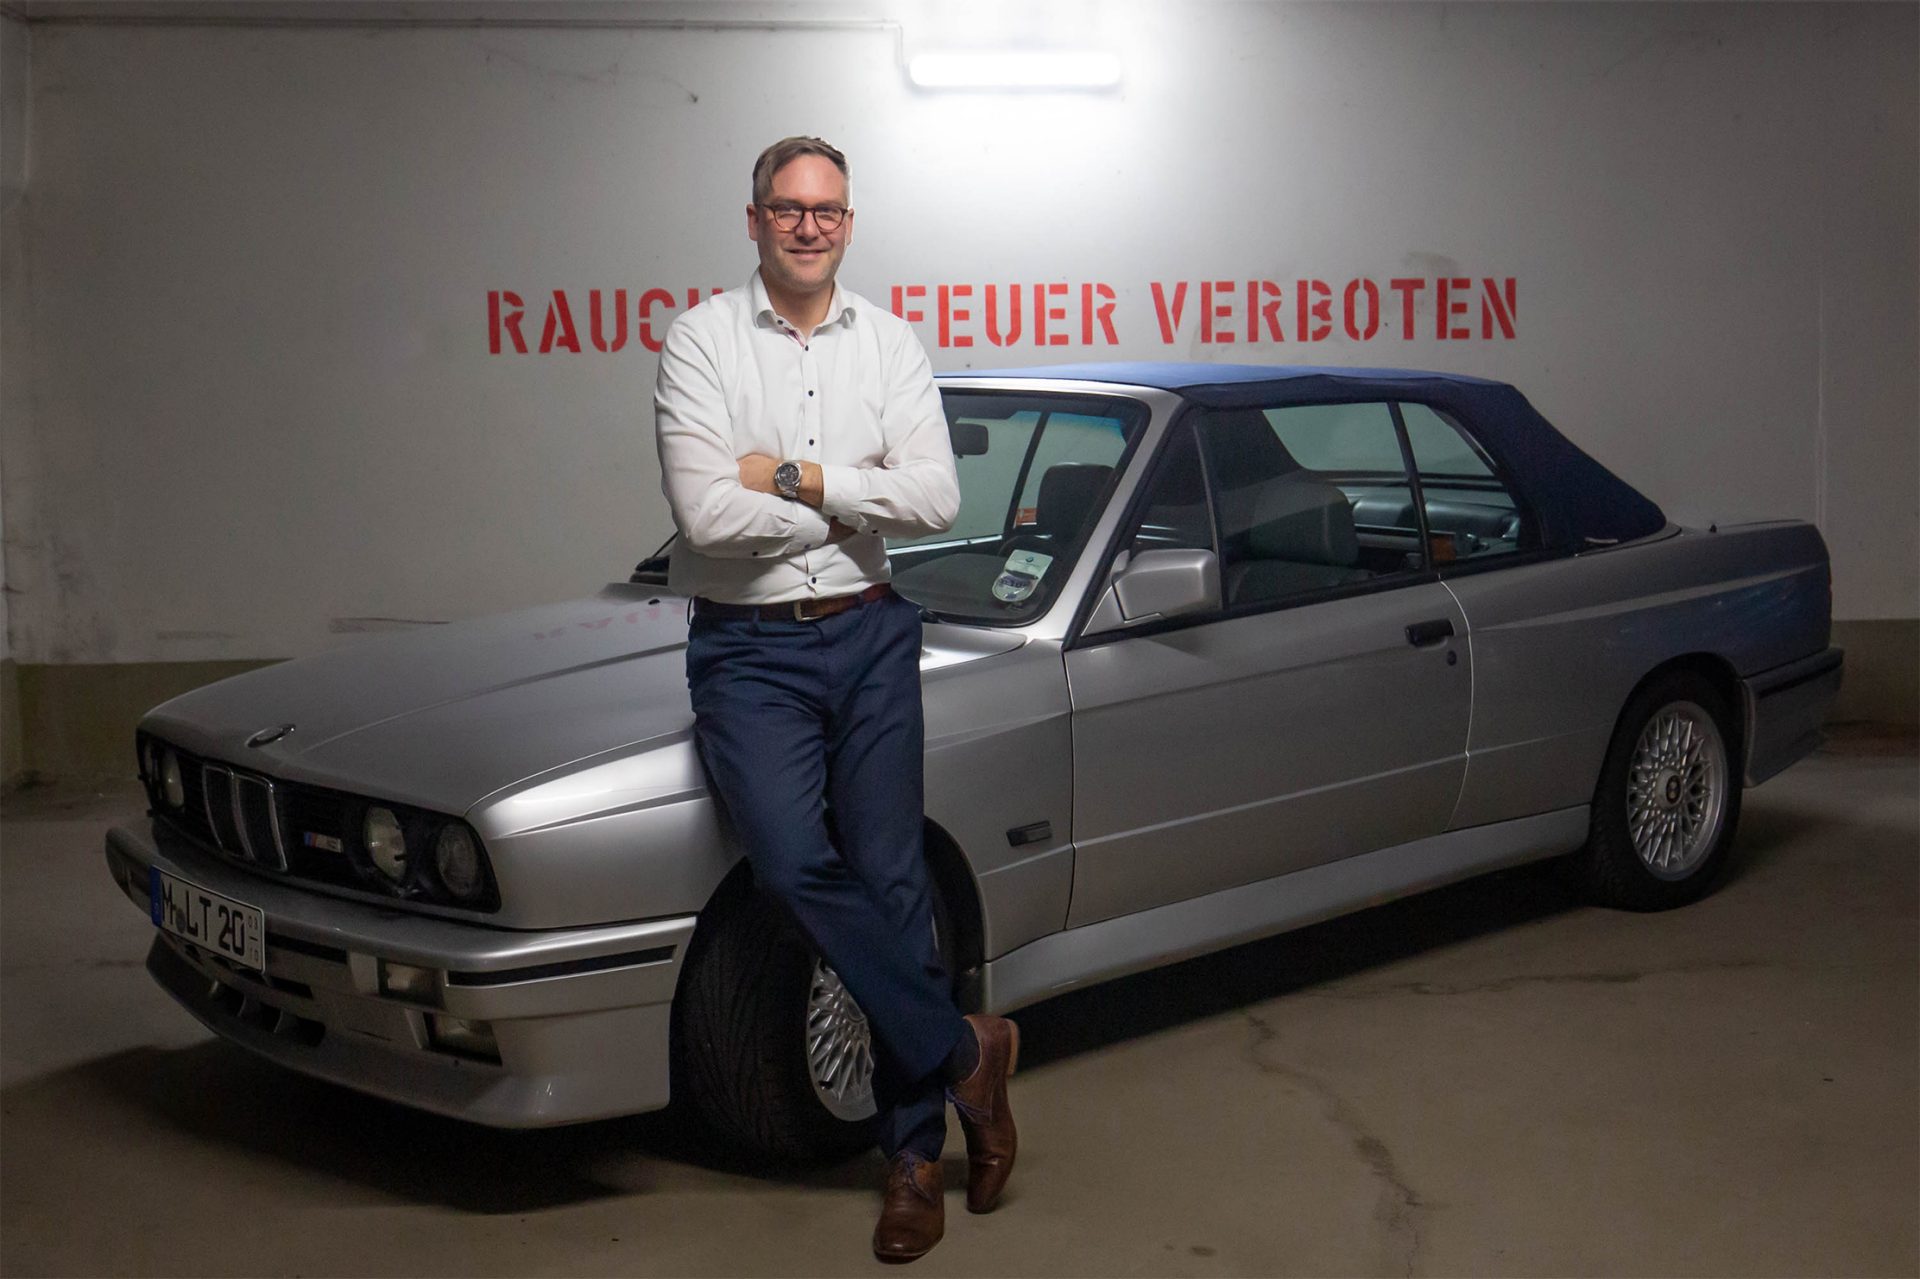 Tino Laub and his repeat-purchased BMW M3 E30 Convertible.